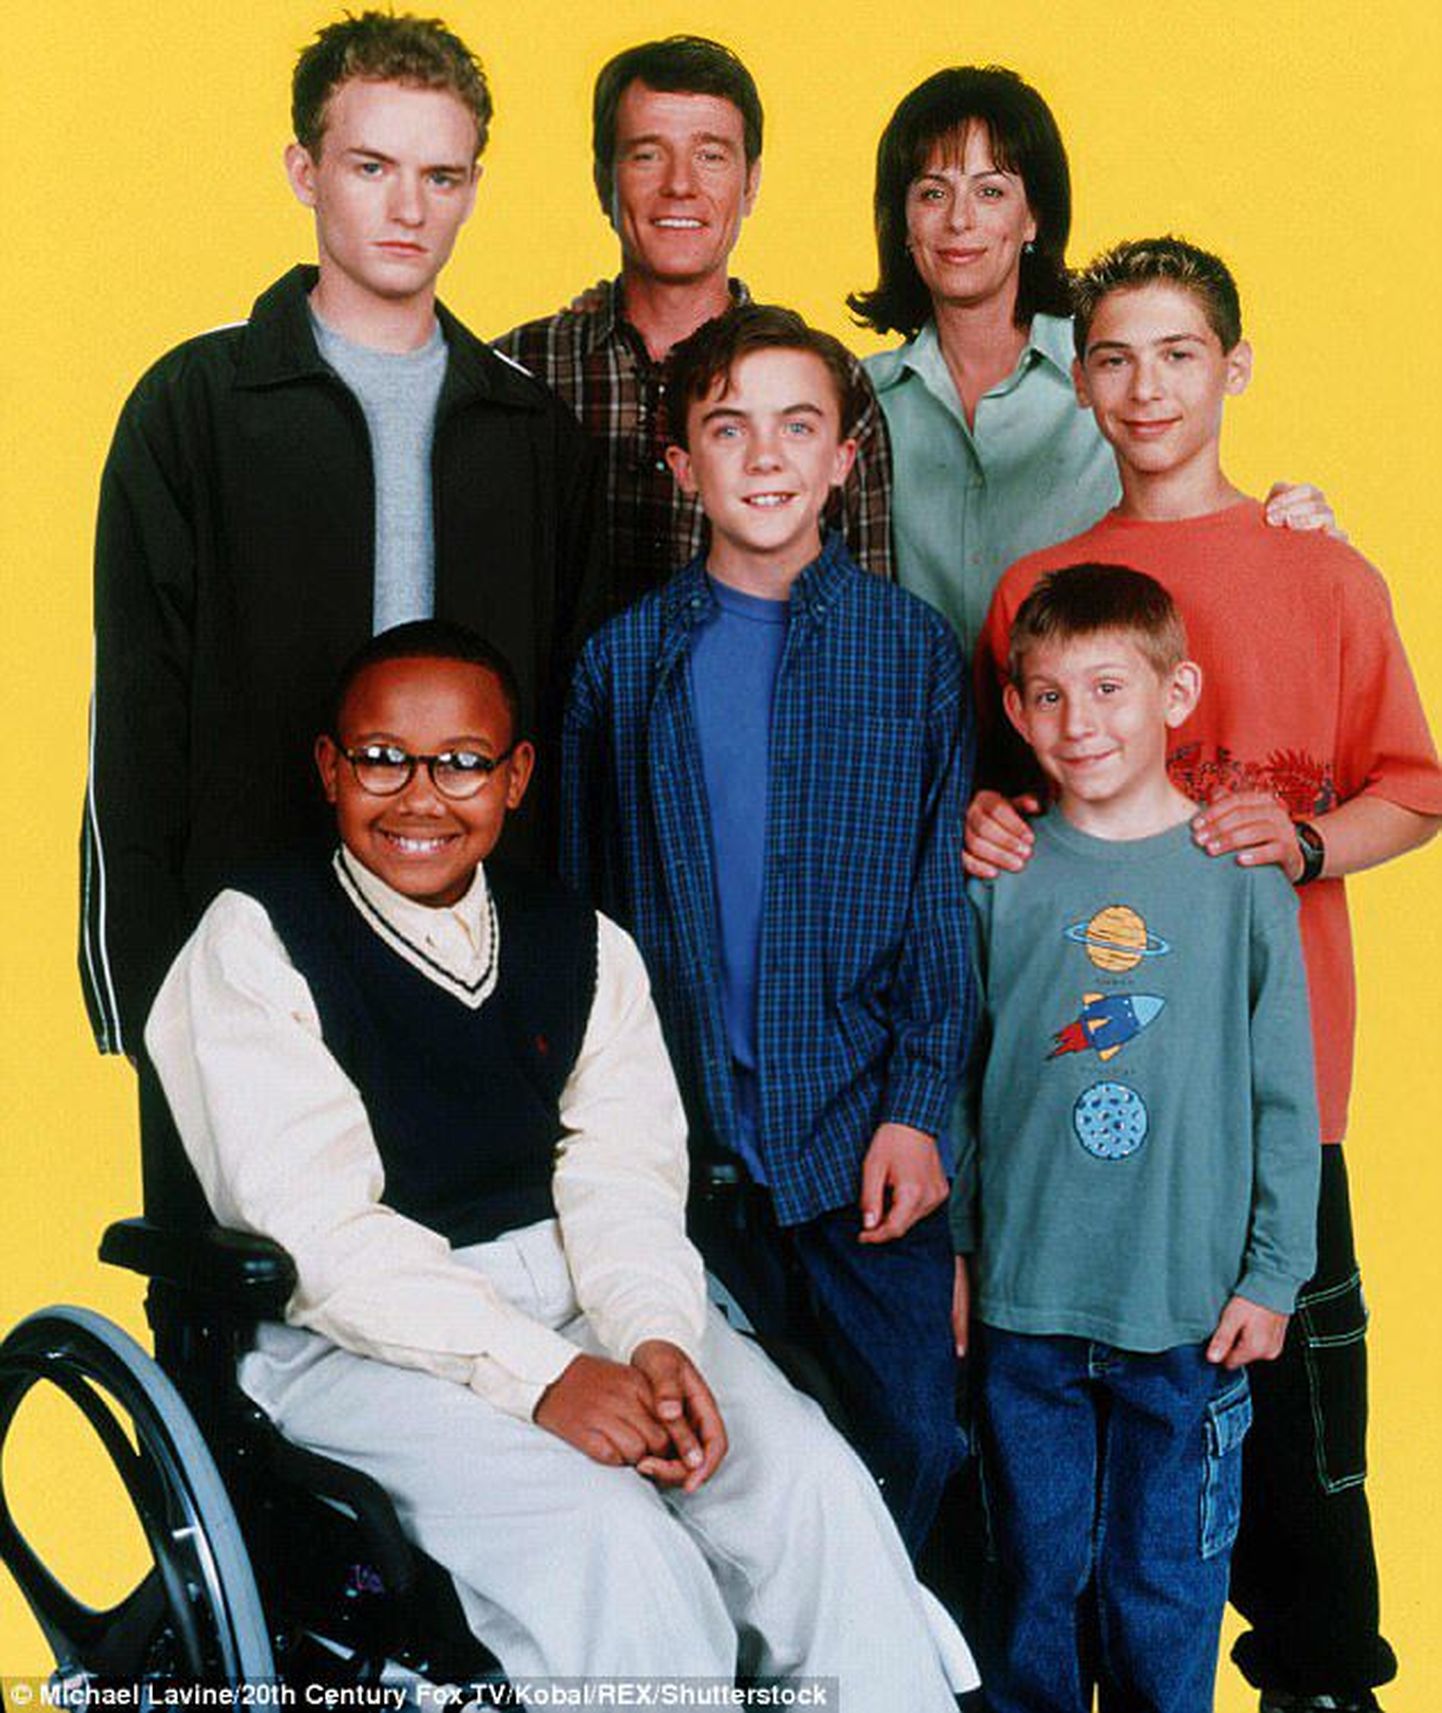 Seriaali «Malcolm in the middle» tegelased.